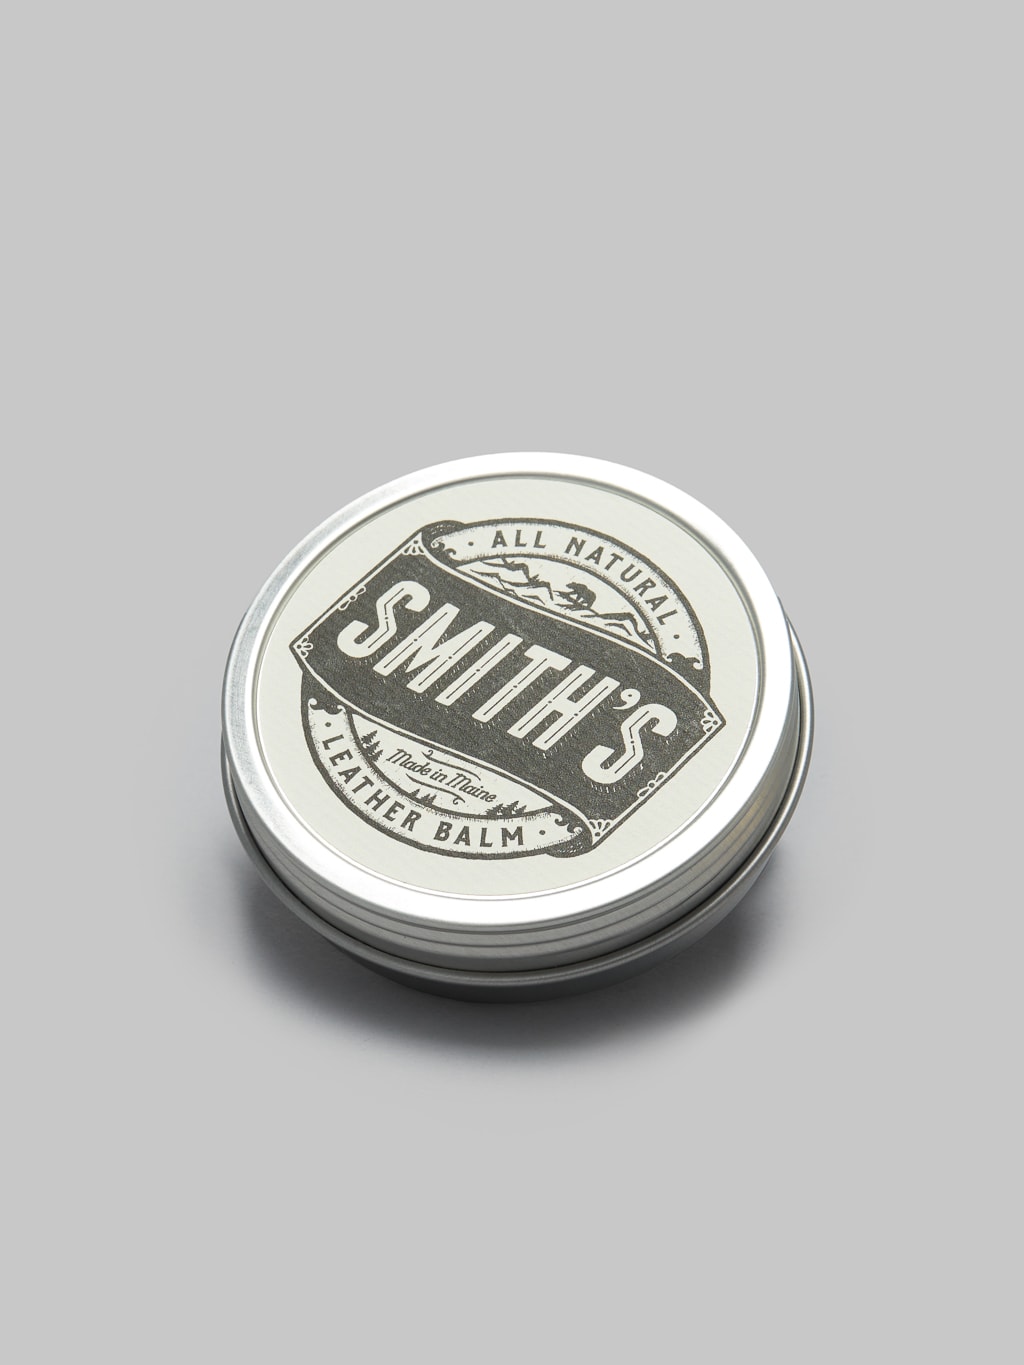 Smith s Leather Balm all natural front view